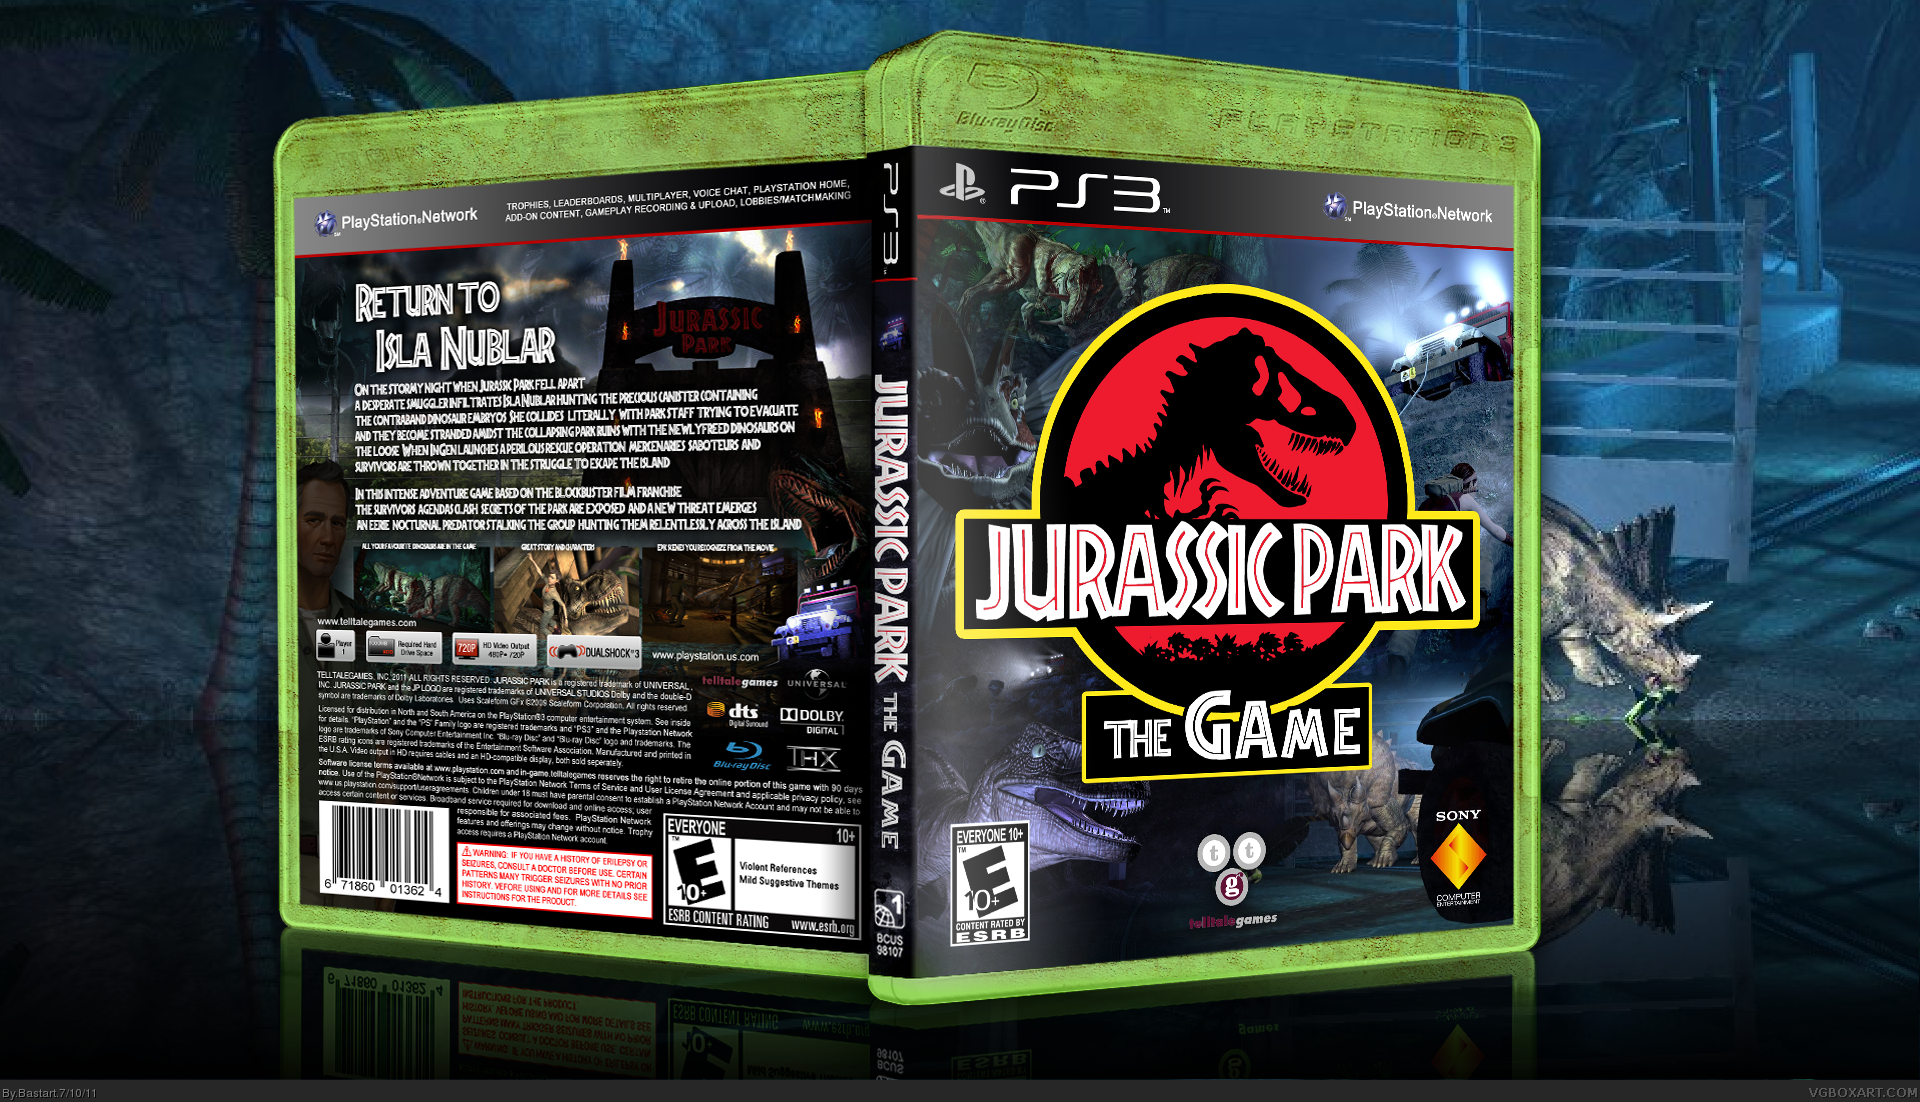 Jurassic Park The Game box cover